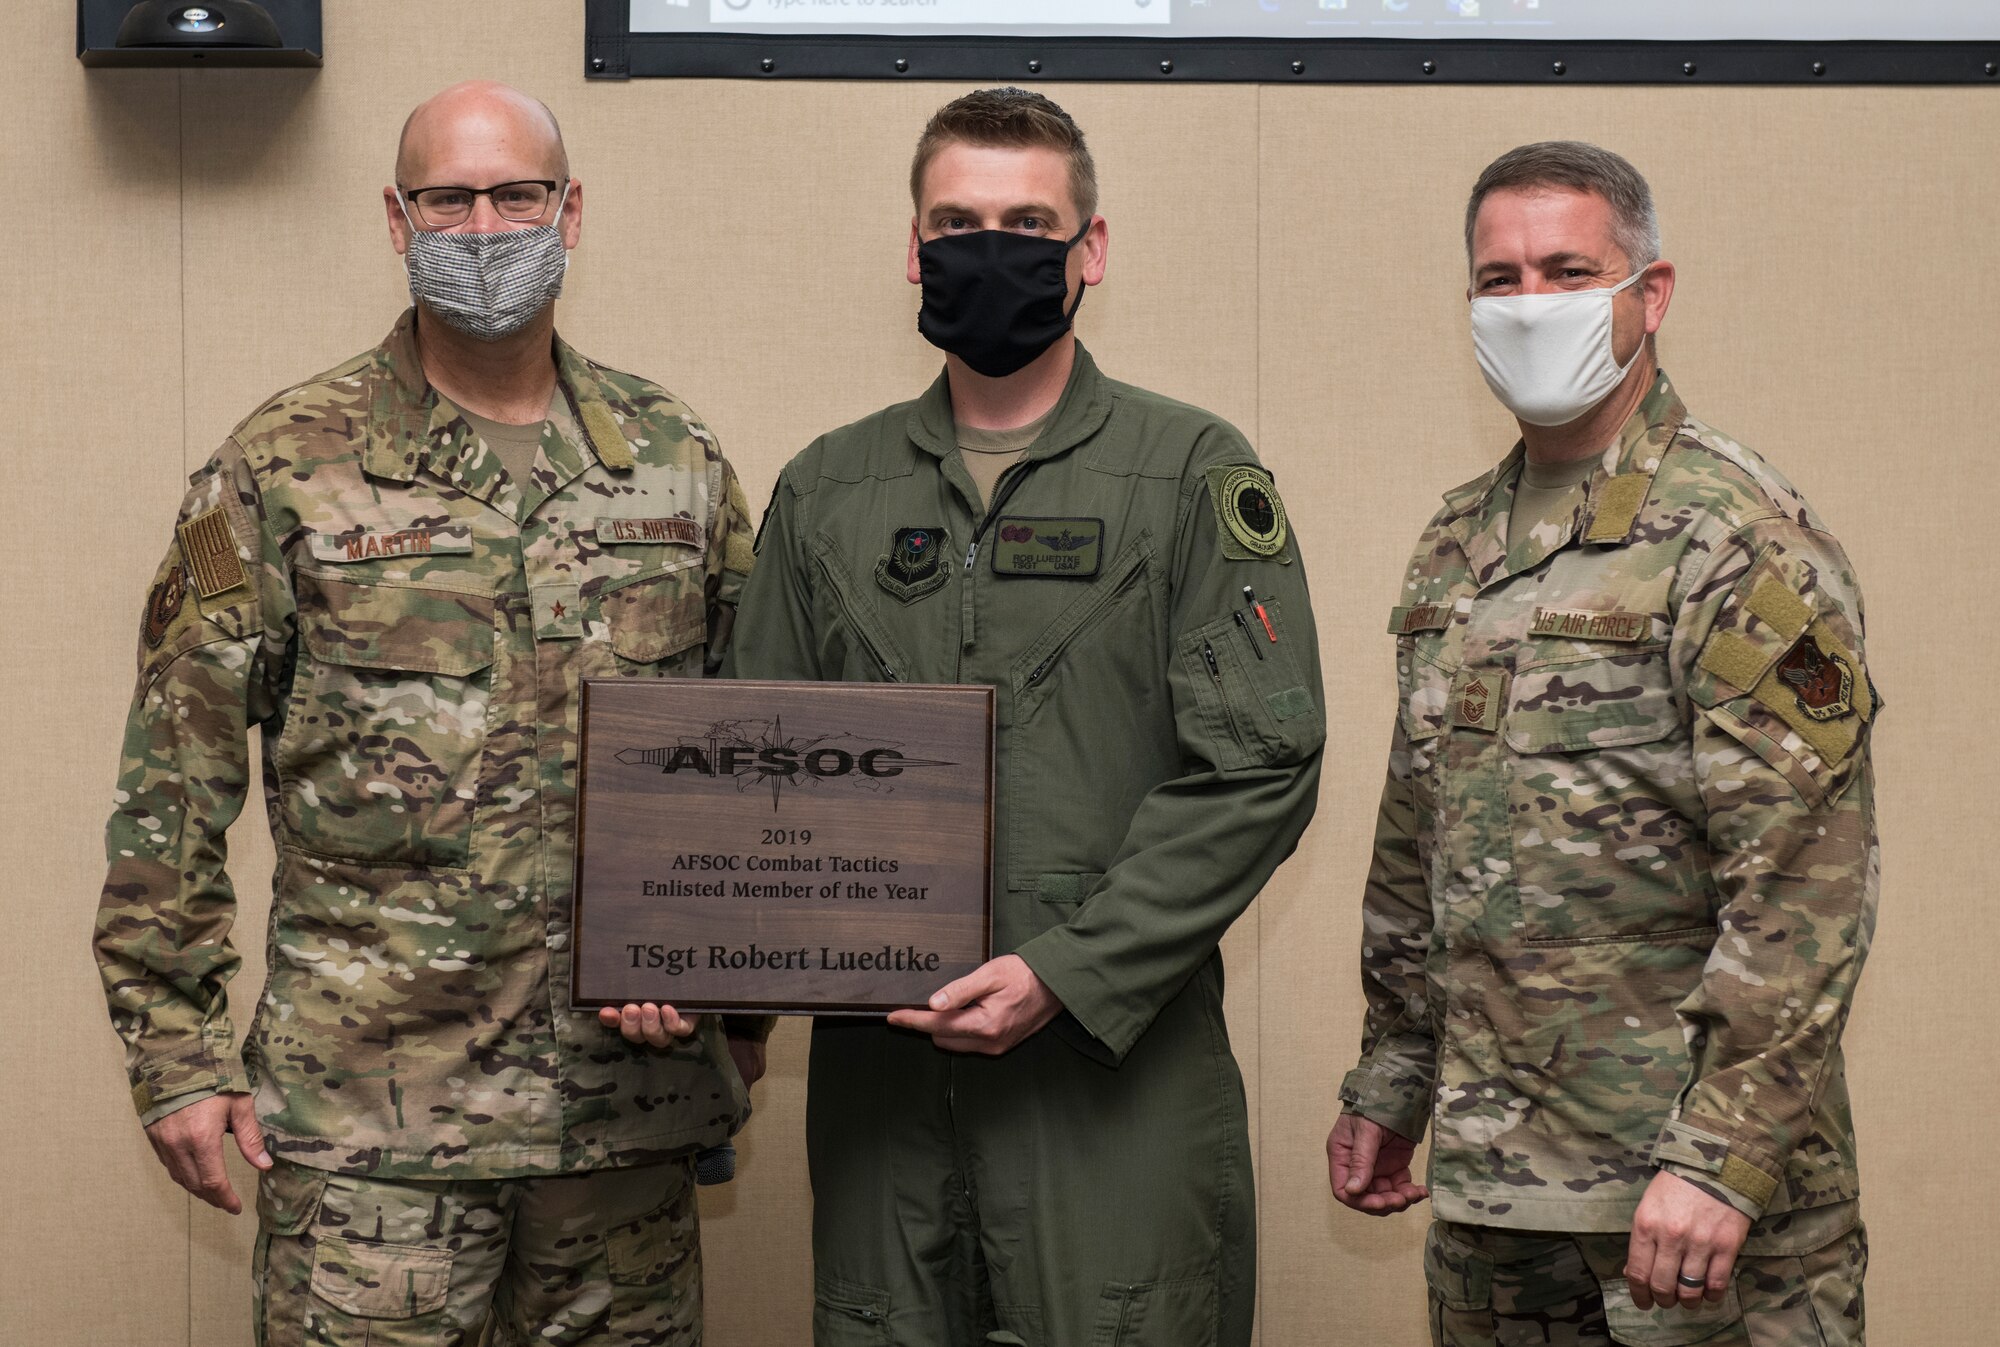 TSgt Robert Luedtke was presented the 2019 Combat Tactics Enlisted Member of Year award.